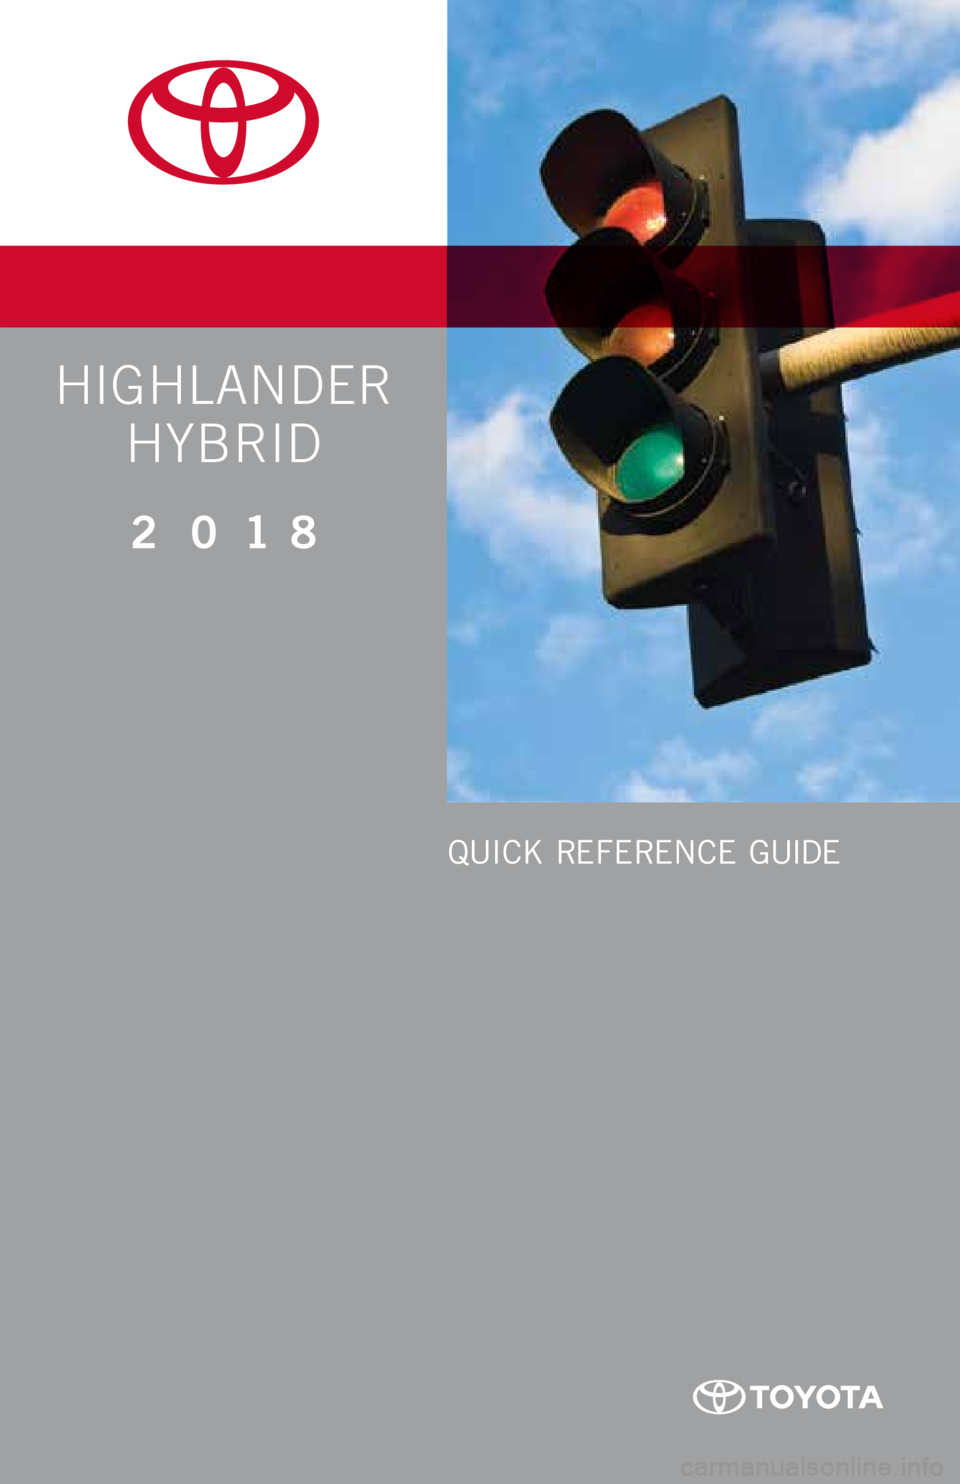 TOYOTA HIGHLANDER HYBRID 2018  Owners Manual (in English) HIGHLANDER 
HYBRID
2 0 18
www.toyota.com/owners
CUSTOMER EXPERIENCE CENTER  
1- 8 0 0 - 3 31- 4 3 31
Printed in U.S.A. 9/17
17 - M K G - 1 0 2 2 1
QUICK REFERENCE GUIDE  